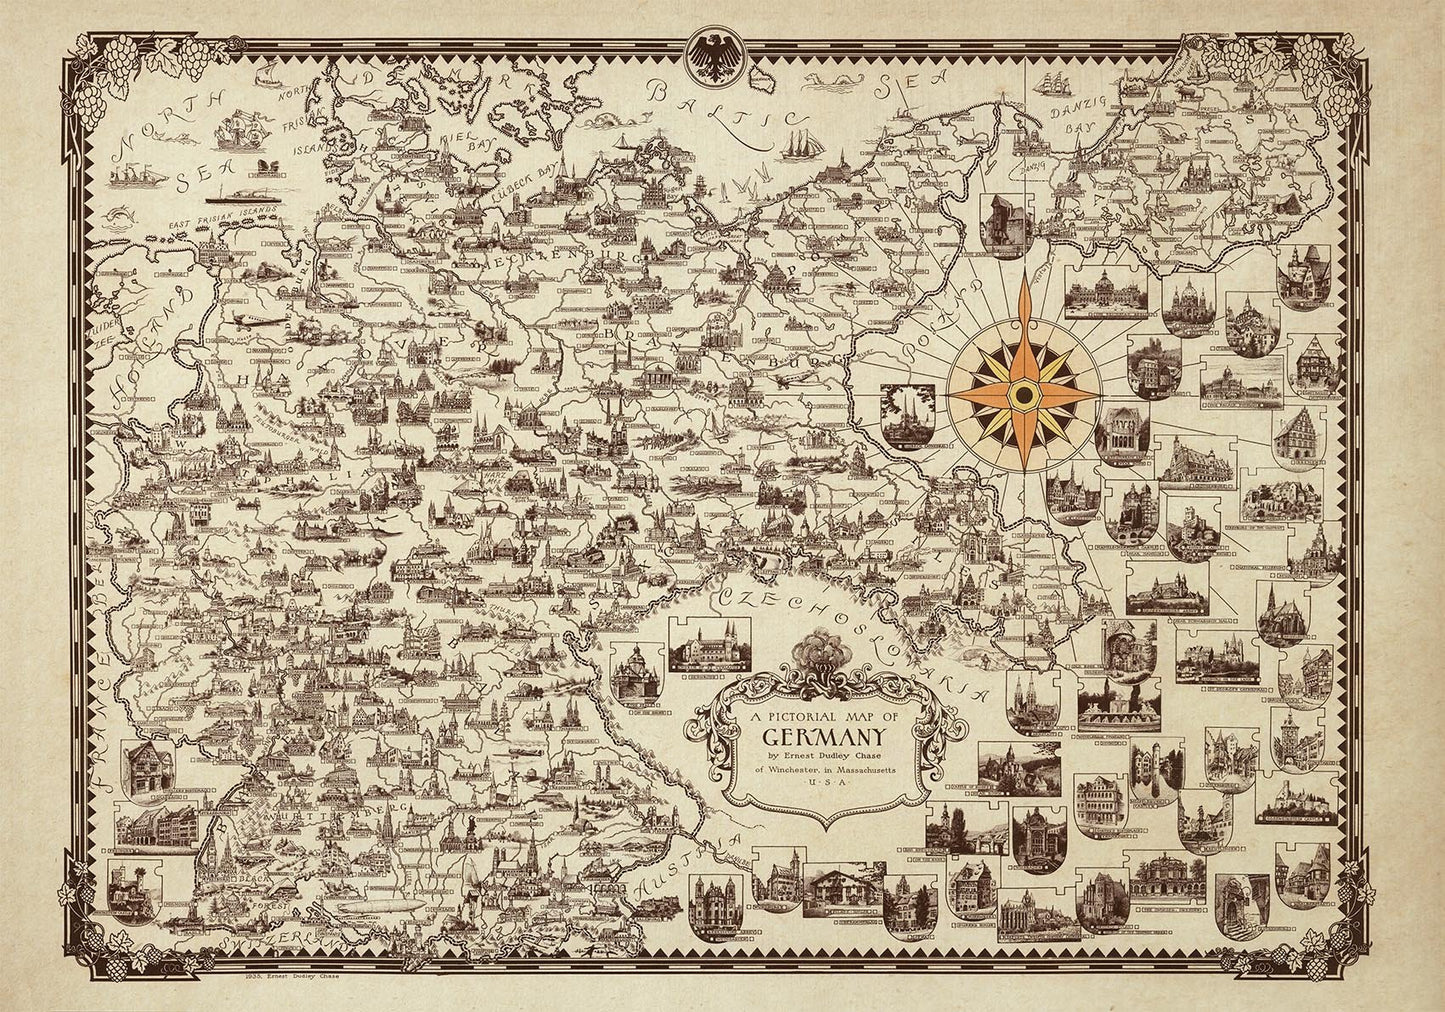 A Pictorial Map of Germany by Ernst Dudley Chase